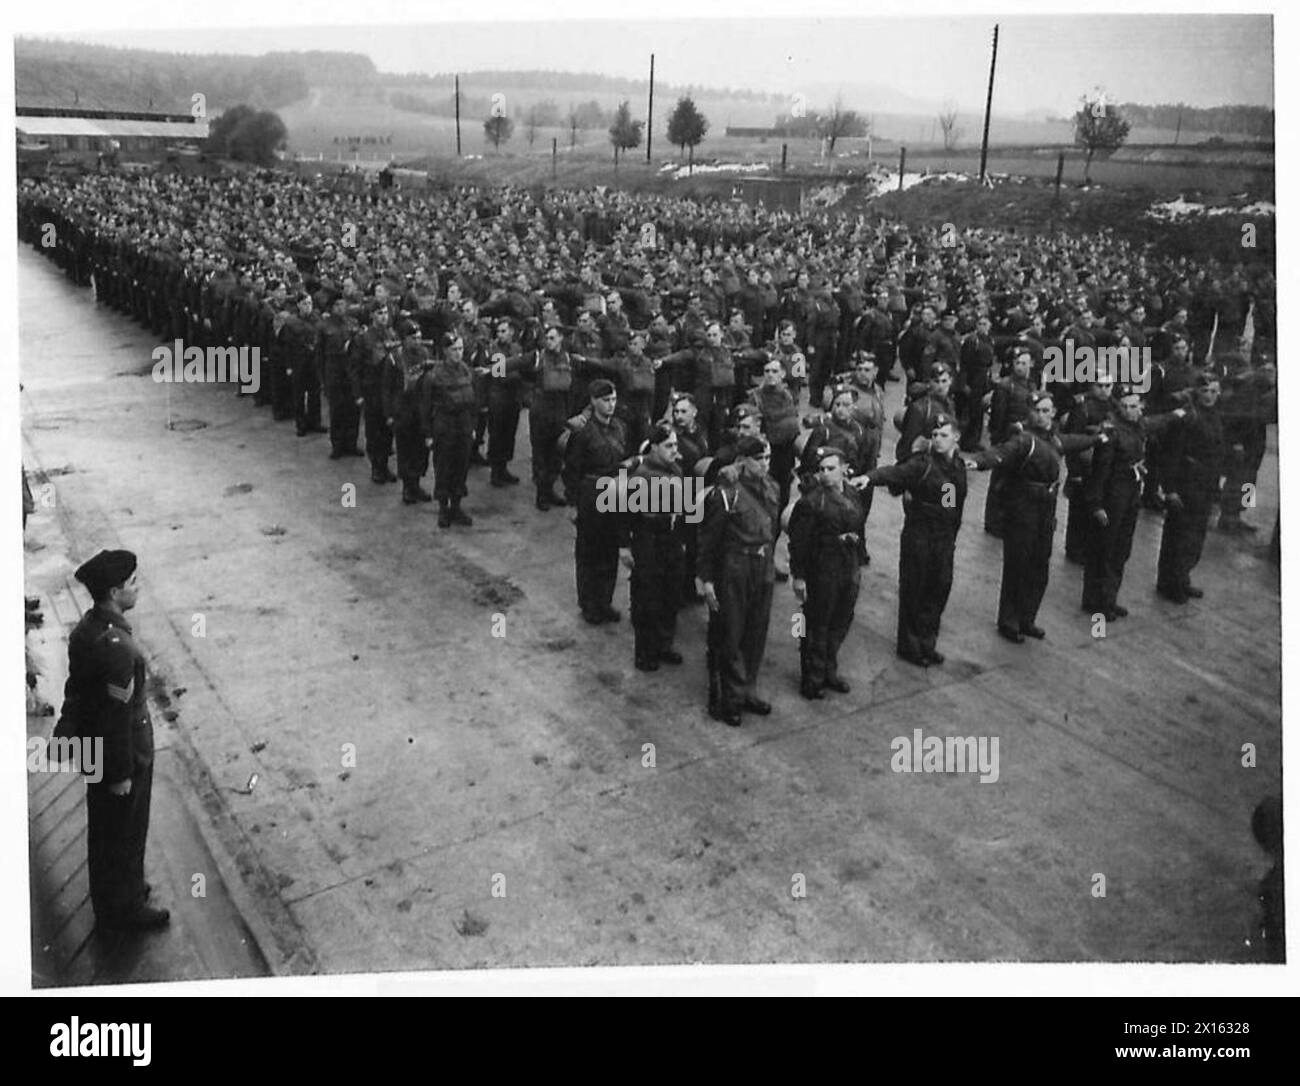 FROM 'CIVVIE' TO SOLDIER - Pte. Langley now shows signs of becoming a good soldier and is seen in the foreground on the parade ground British Army Stock Photo